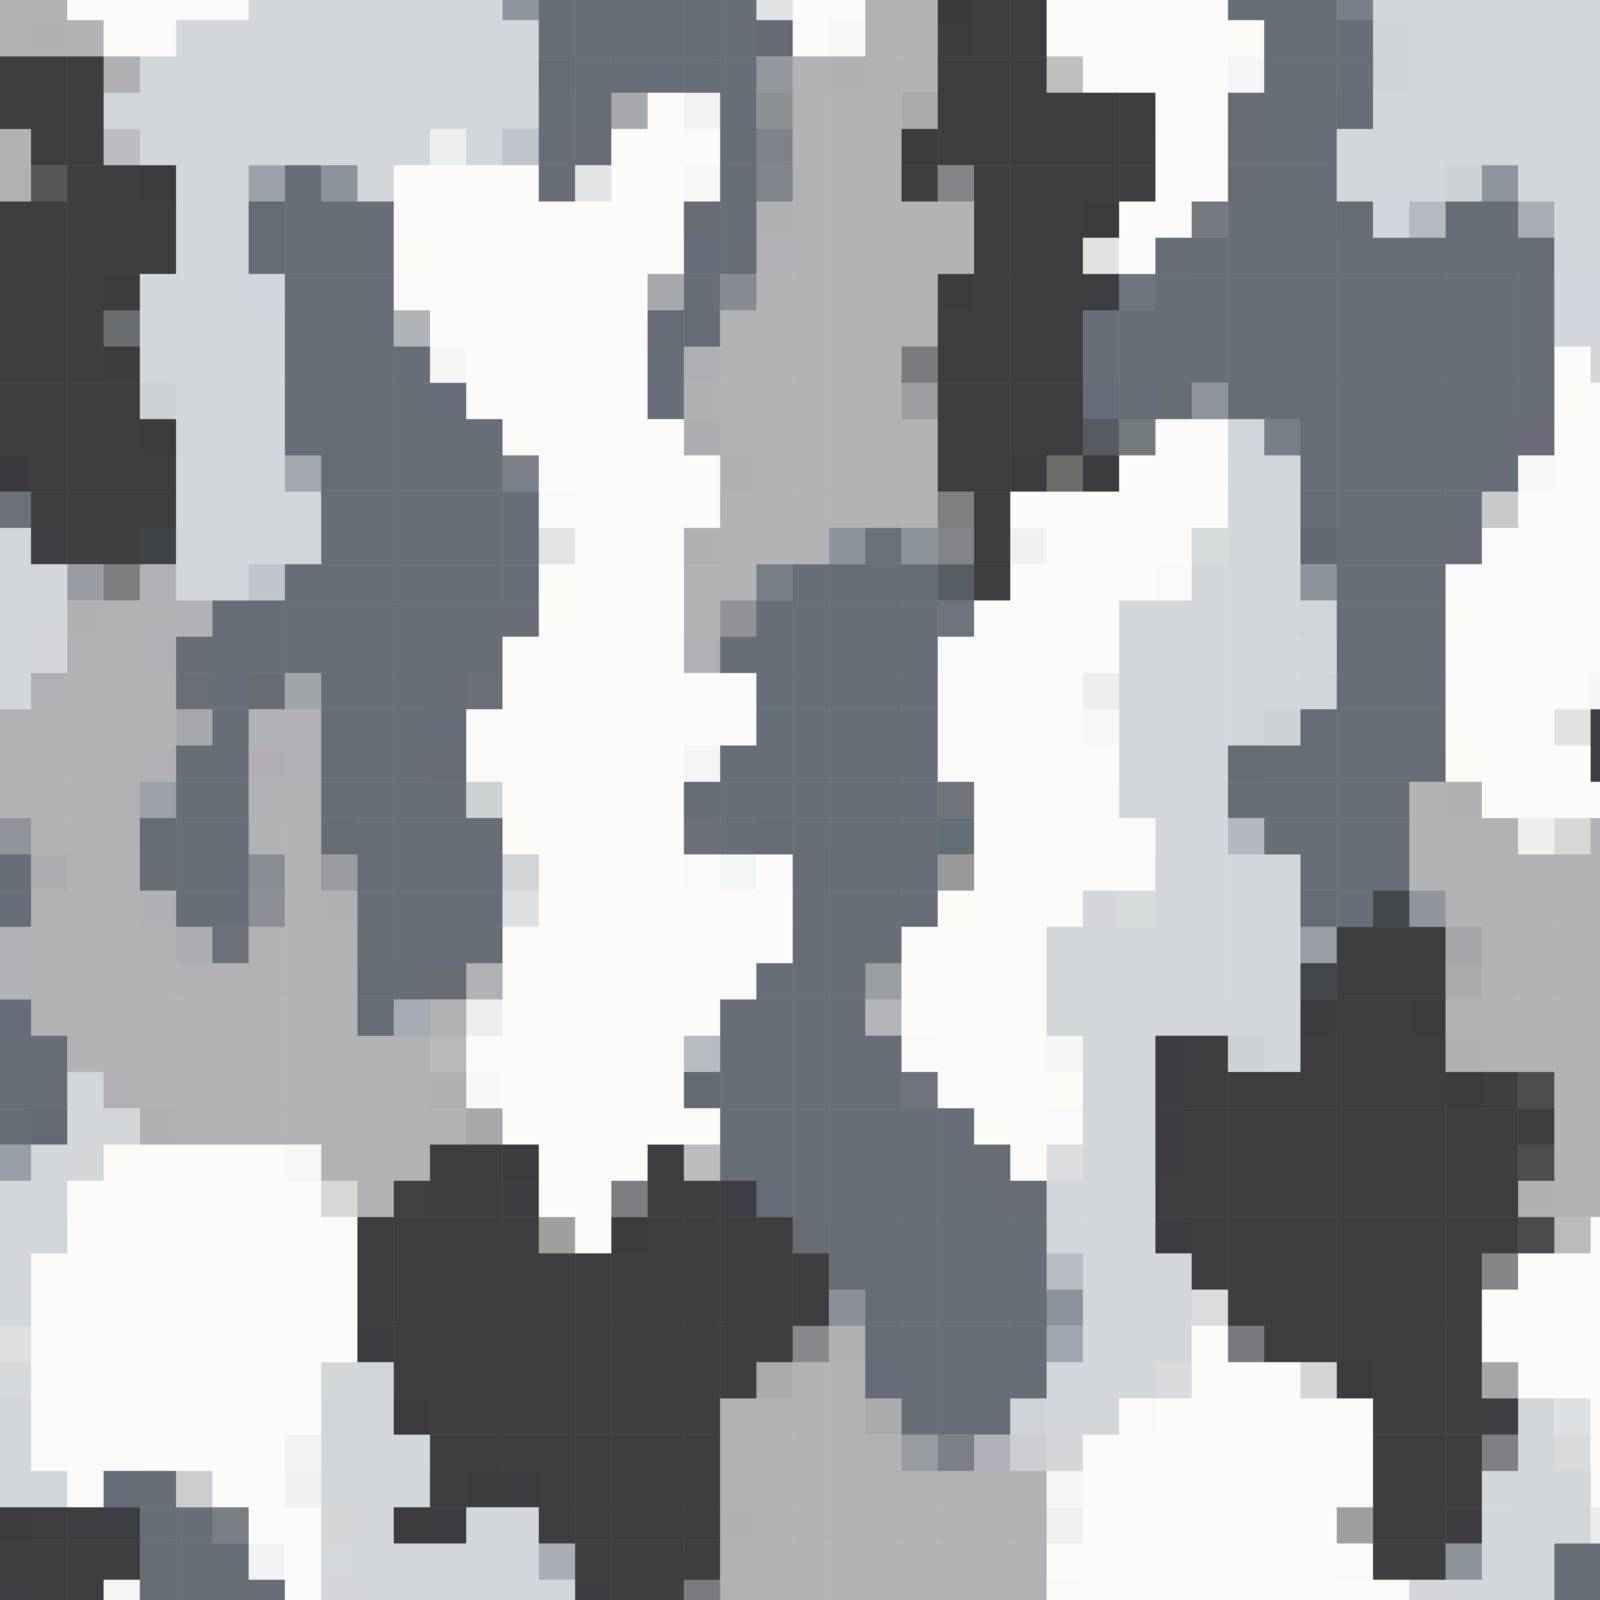 Urban Camouflage Background. Army Abstract Military Pattern. Grey Pixel Fabric Textile Print for Uniforms and Weapons by valeo5